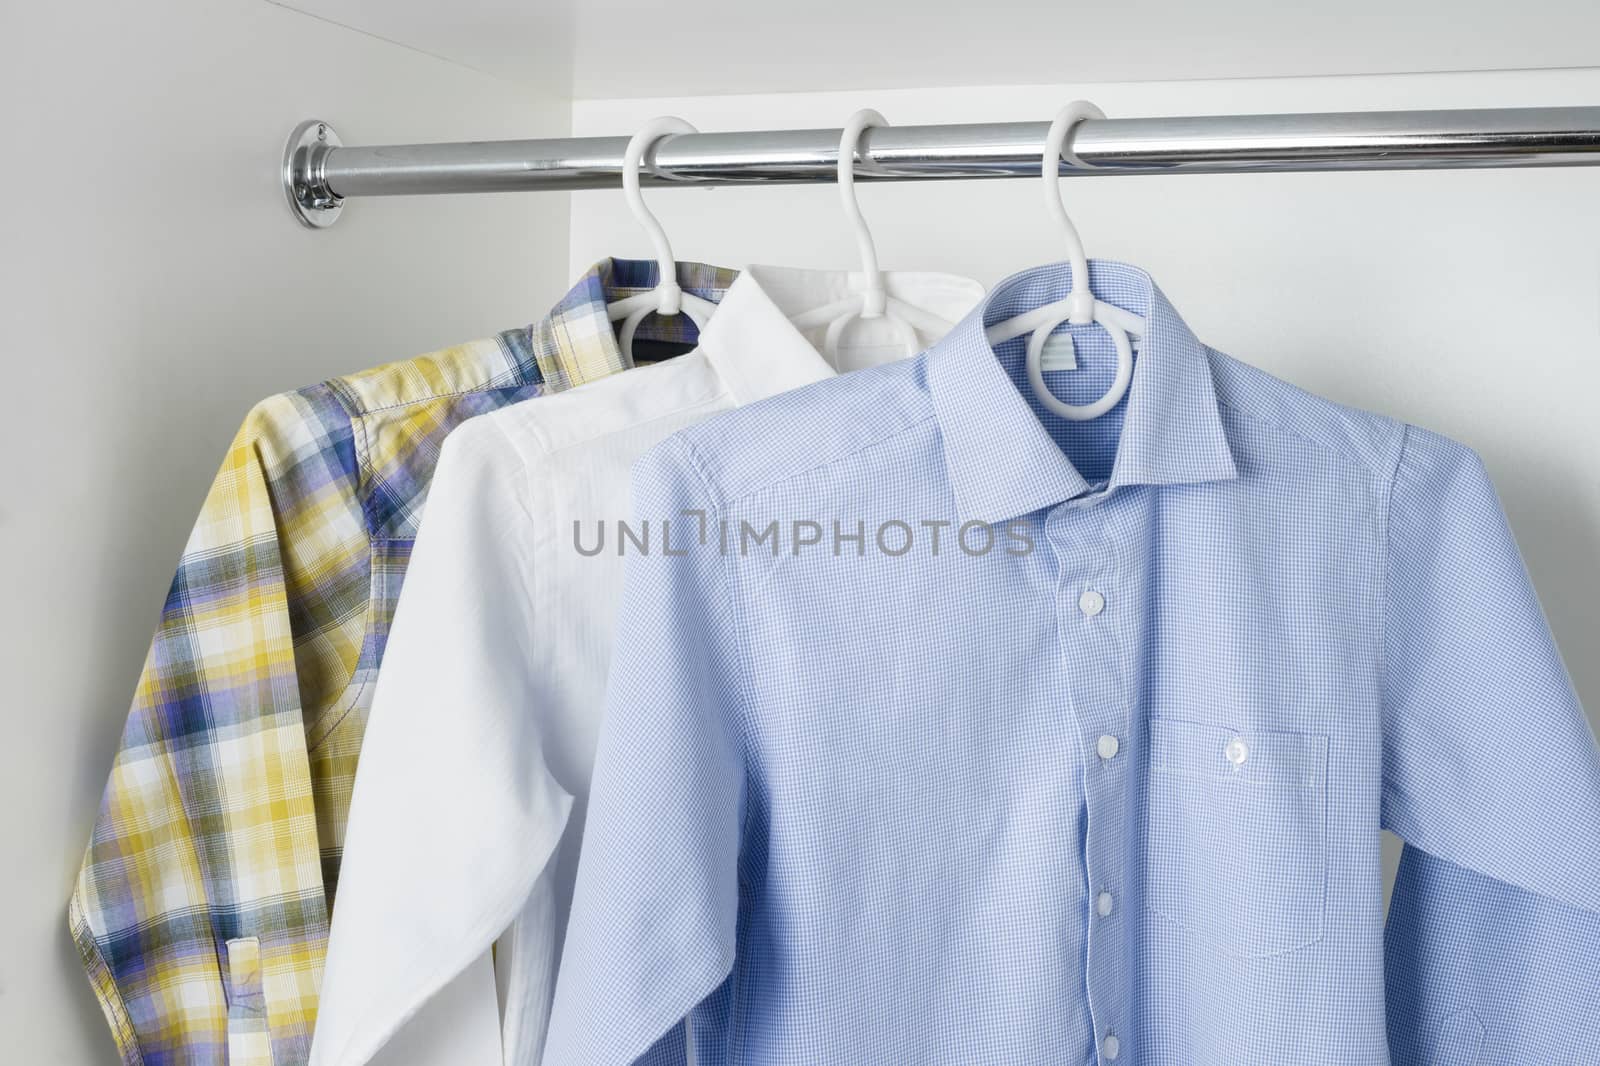 white, blue and checkered clean ironed men's shirts hanging on hangers in the white wardrobe 